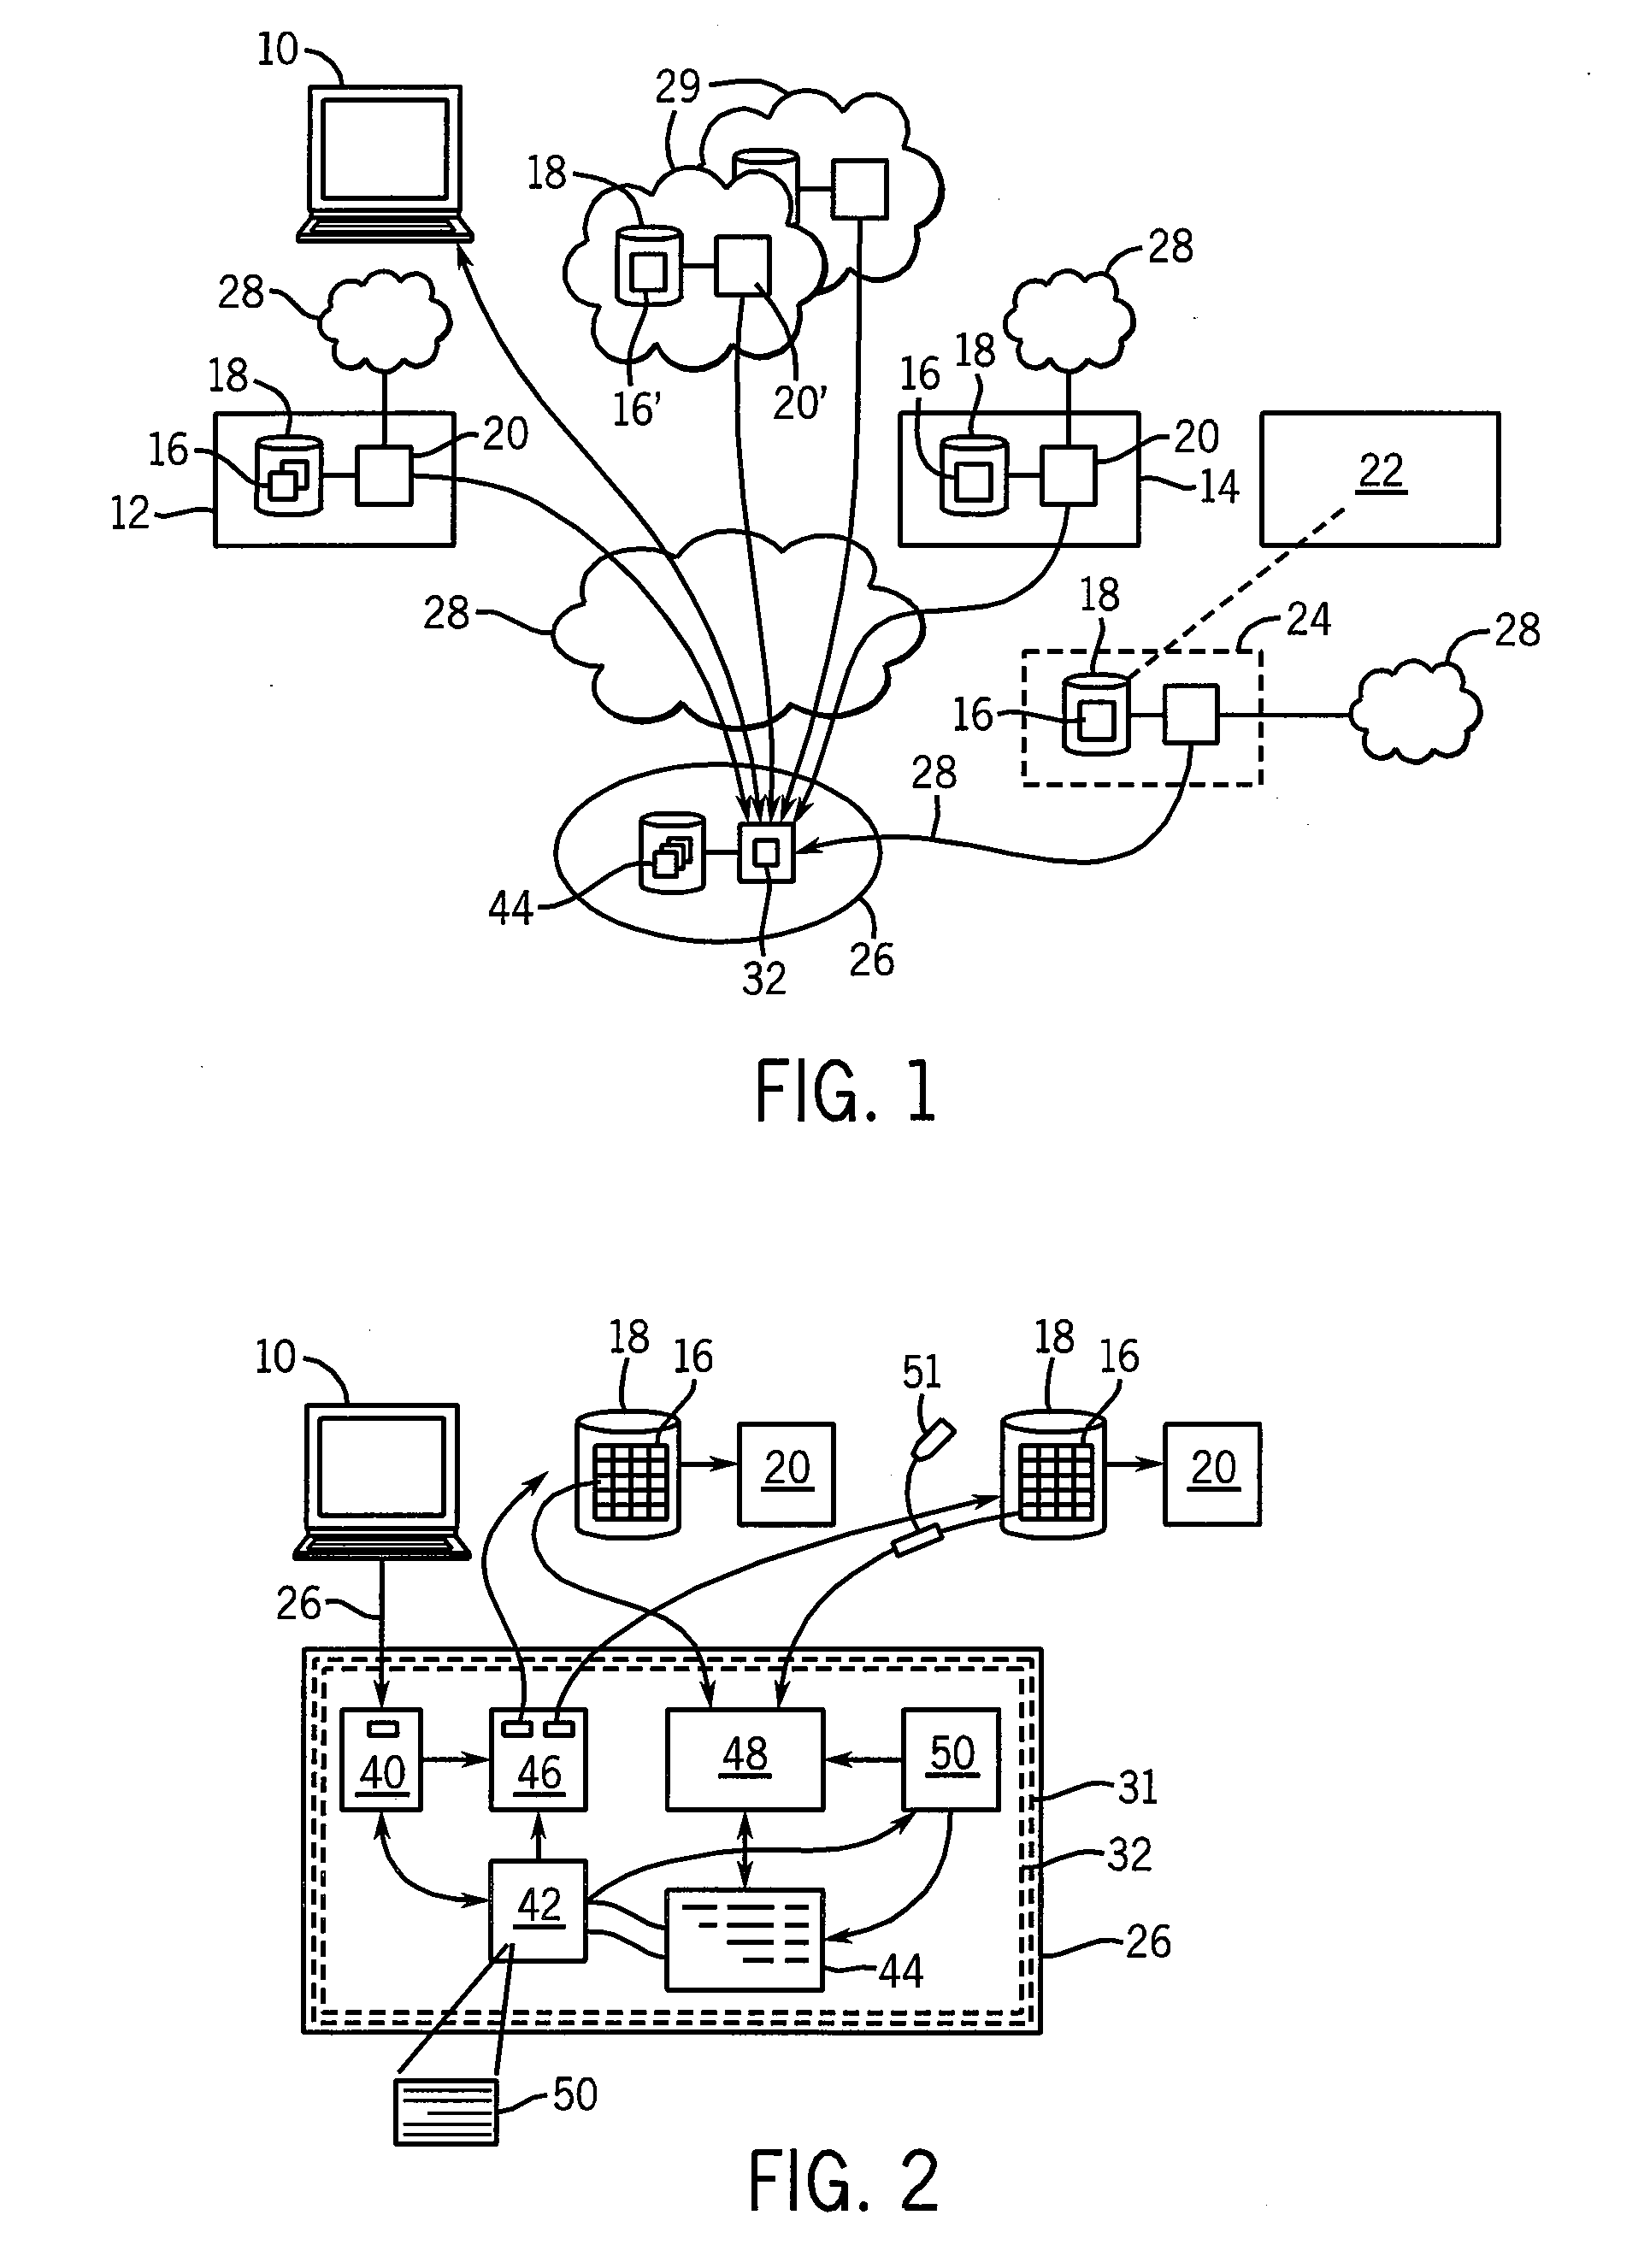 Method and apparatus for accommodating diverse healthcare record centers